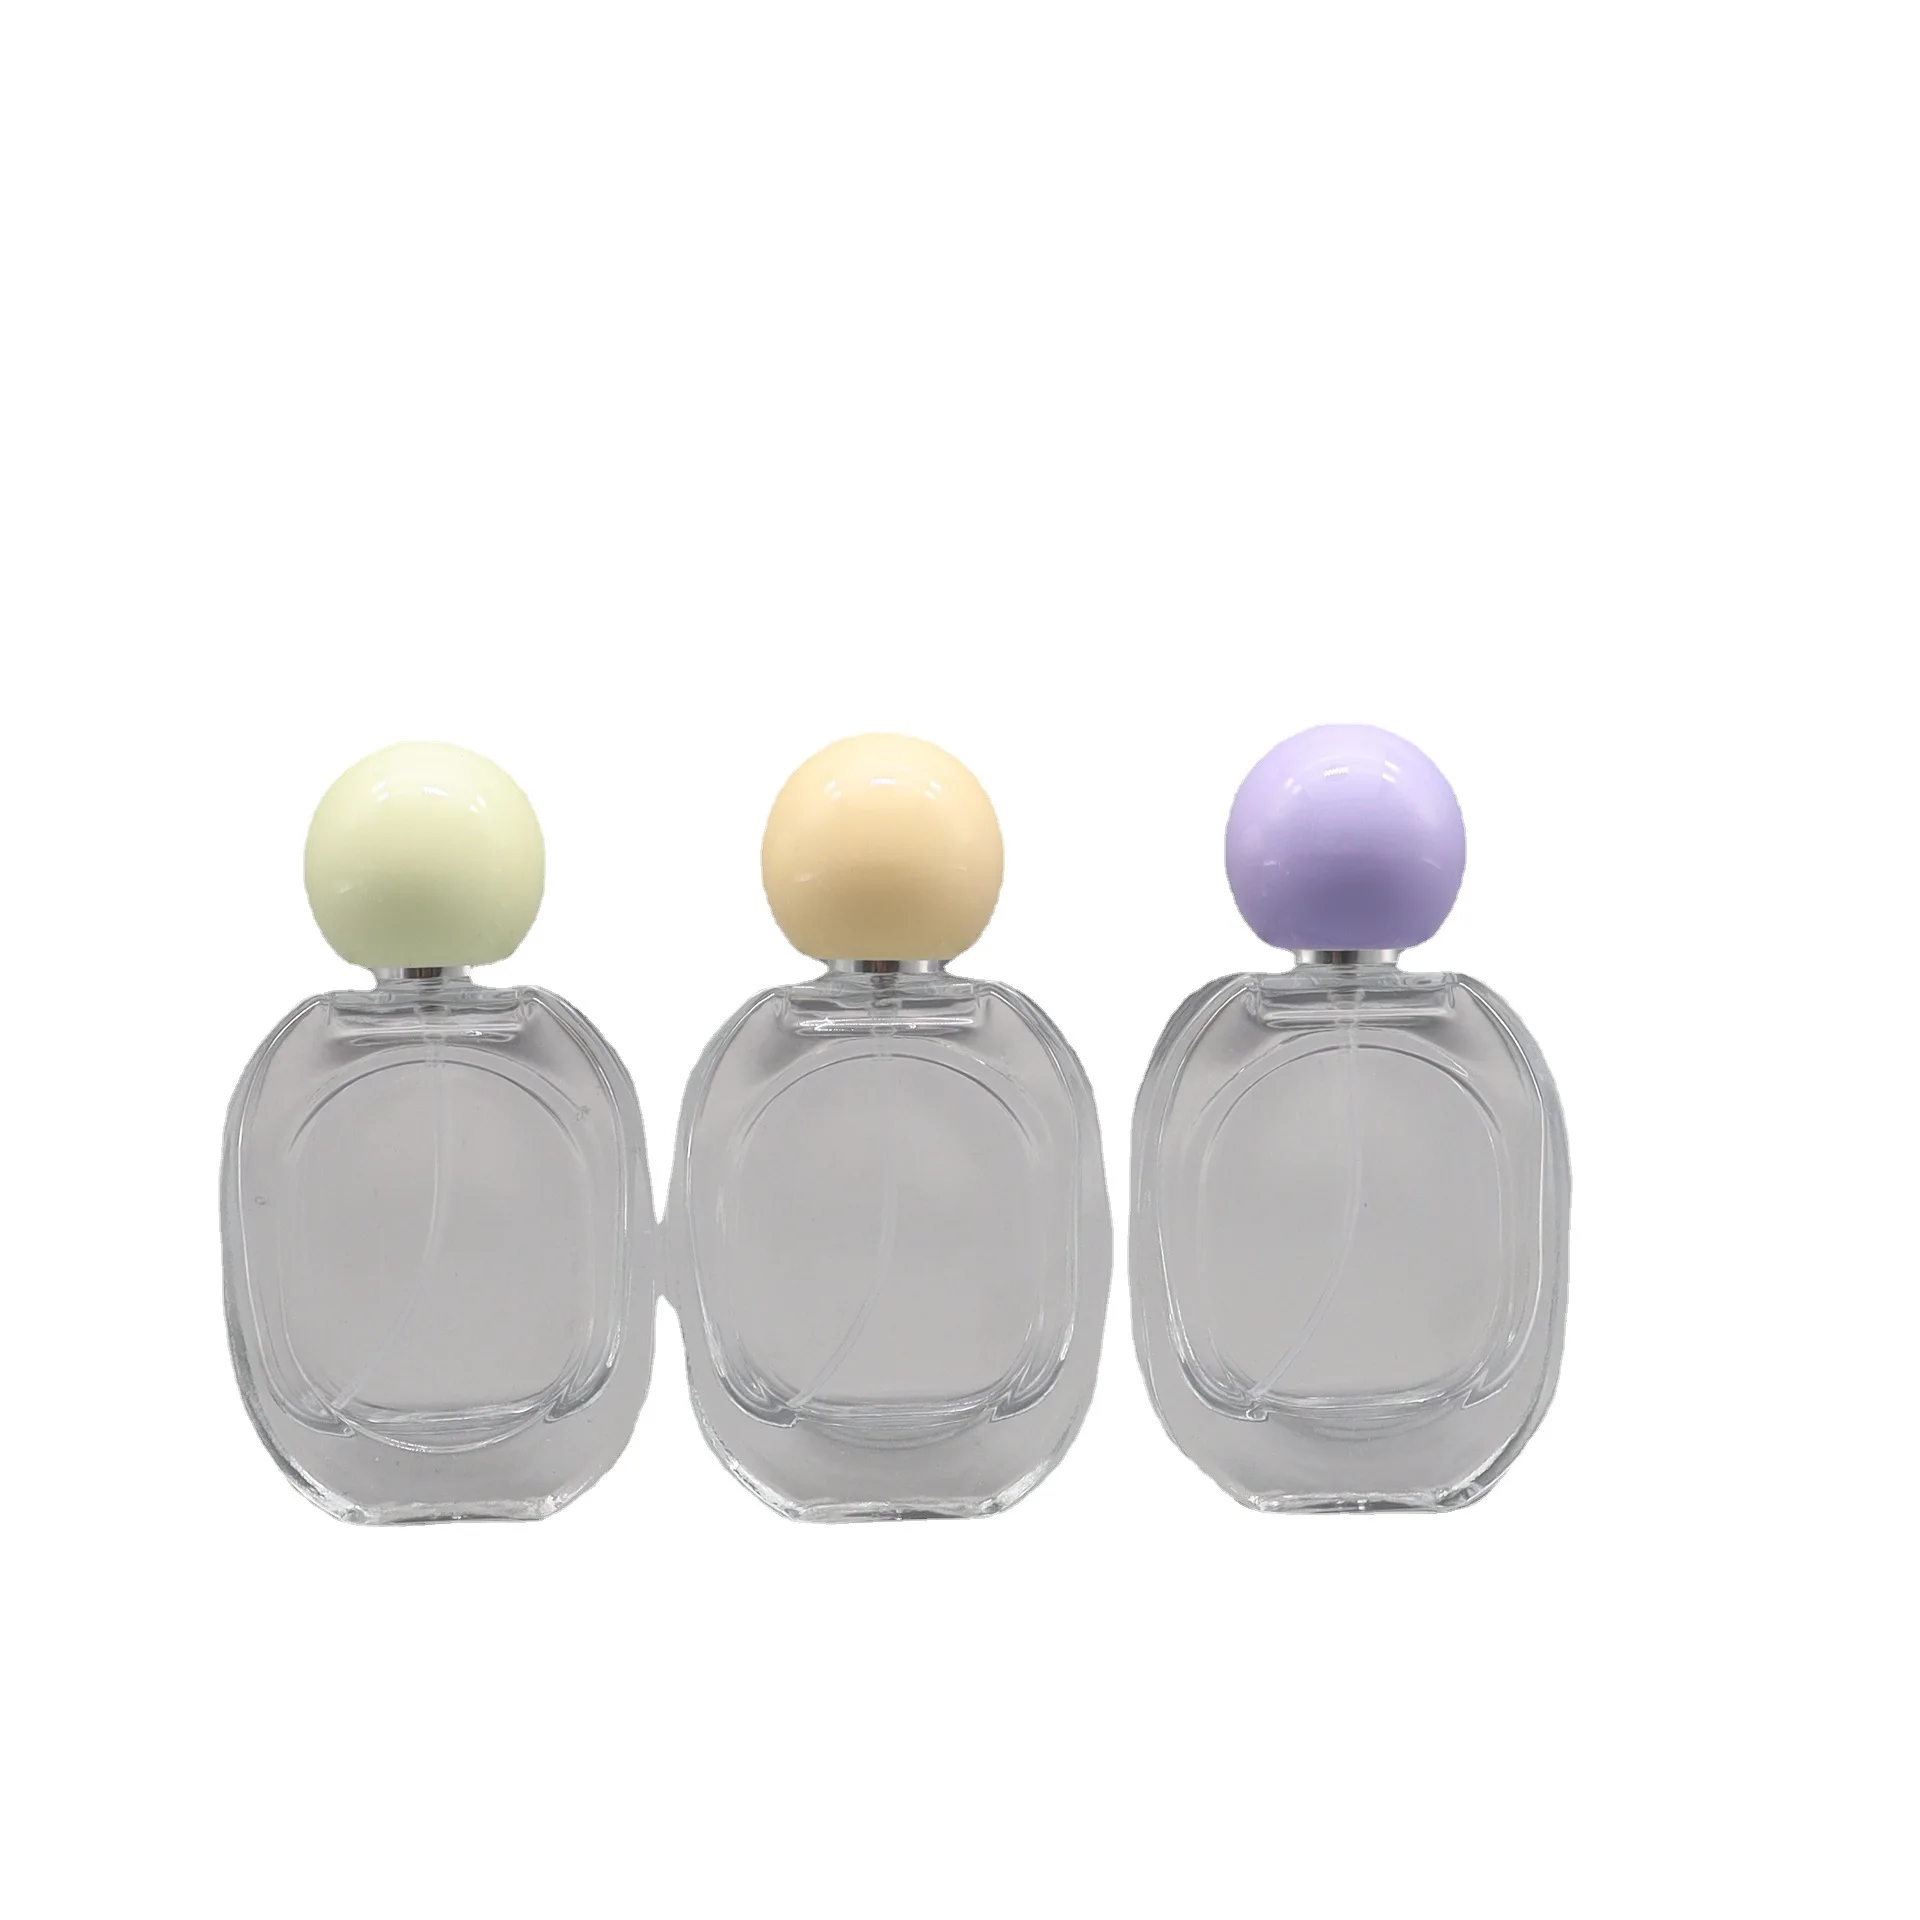 

30ml Glass Empty Refillable Perfume Bottle Oval Bottles Travel Portable Parfum Atomizer Containers Sample Bottle